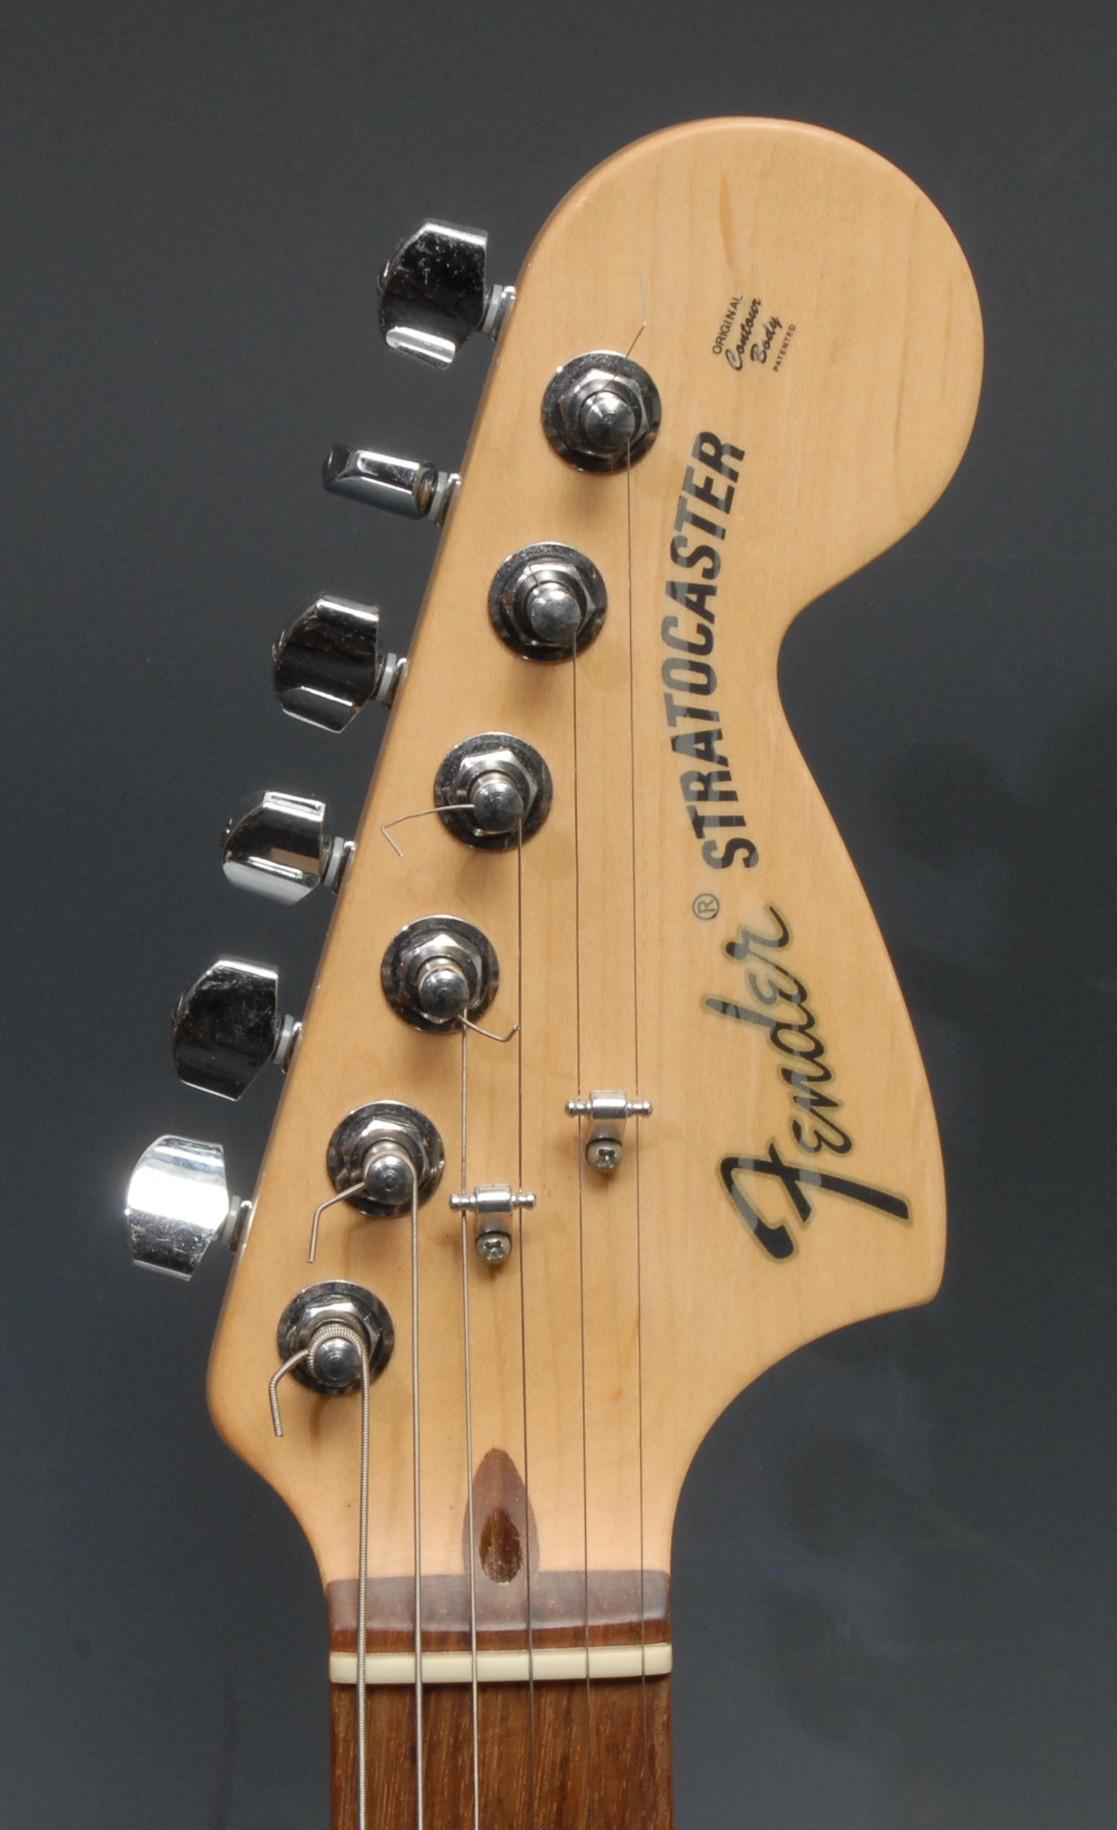 A Fender Stratocaster electric guitar, USA honey blonde, maple neck, rosewood finger board. Serial - Image 4 of 8